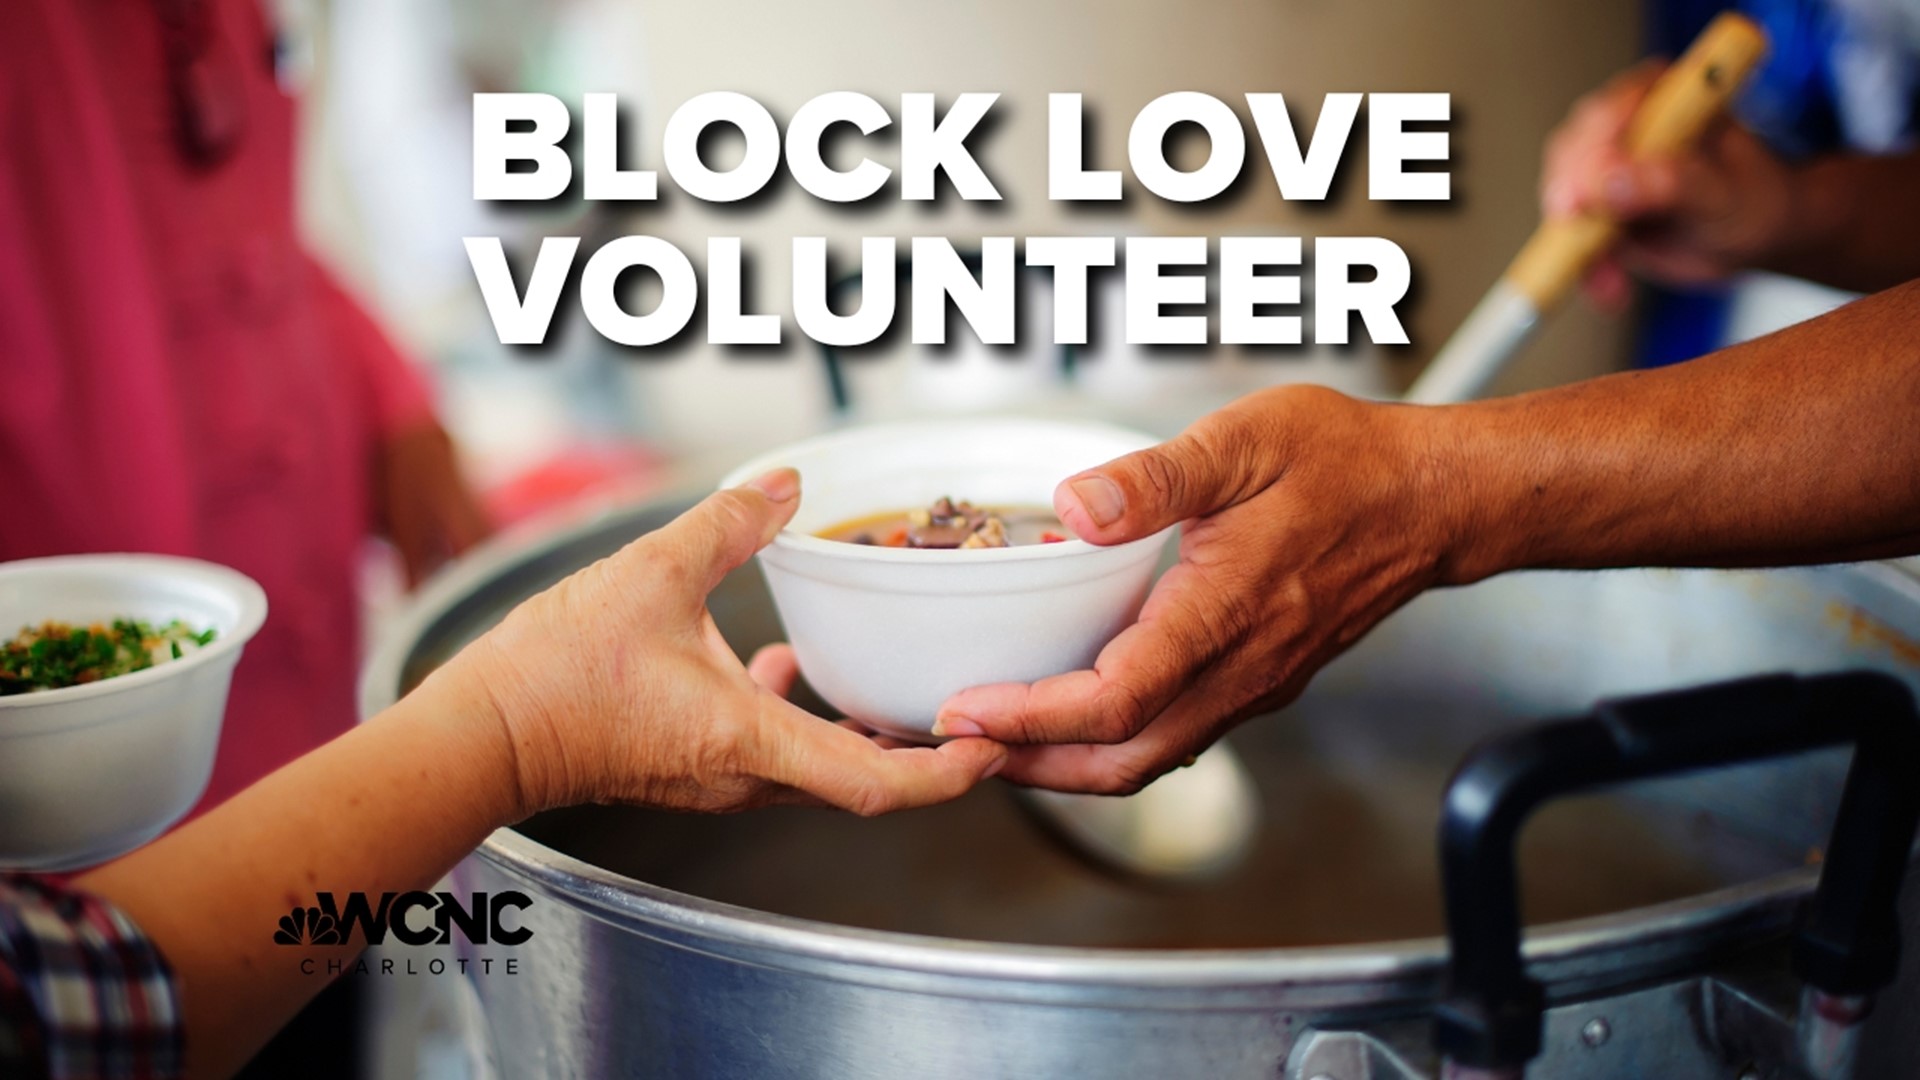 Block Love helped a woman who fell into homelessness, and now she volunteers with the organization helping other people.